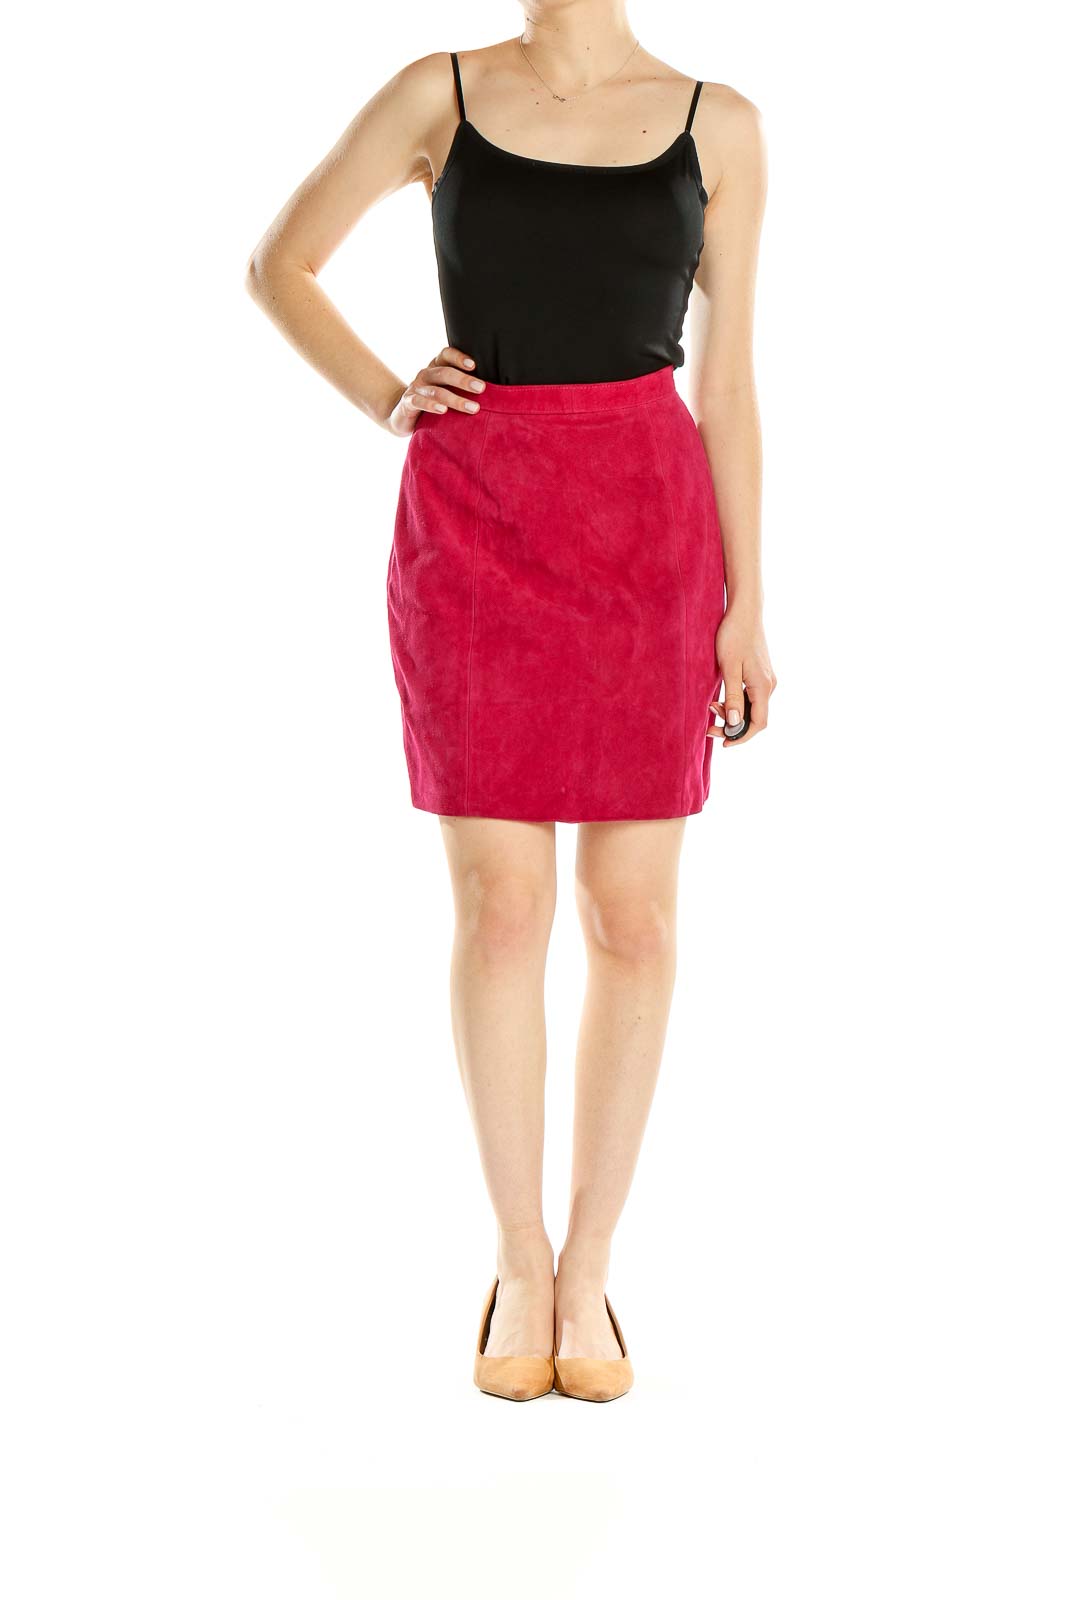 Red Chic Pencil Skirt